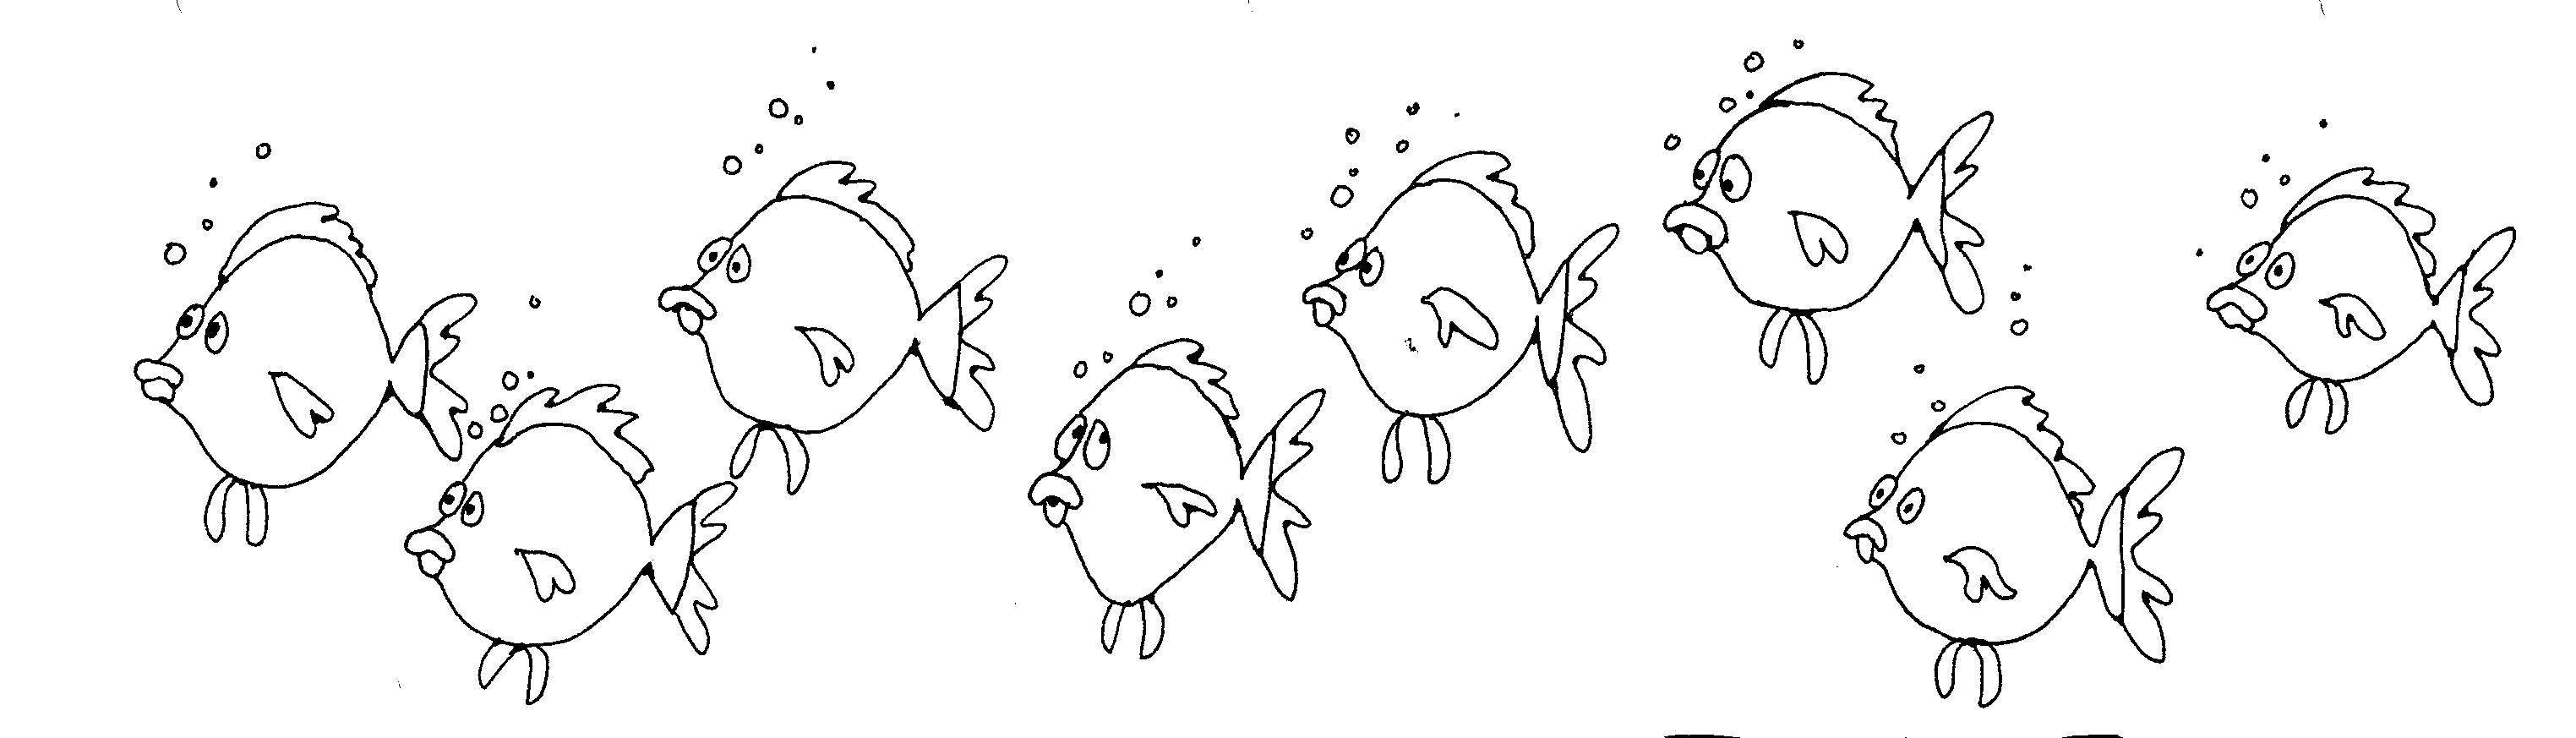 Fish  black and white school of fish clipart black and white 2